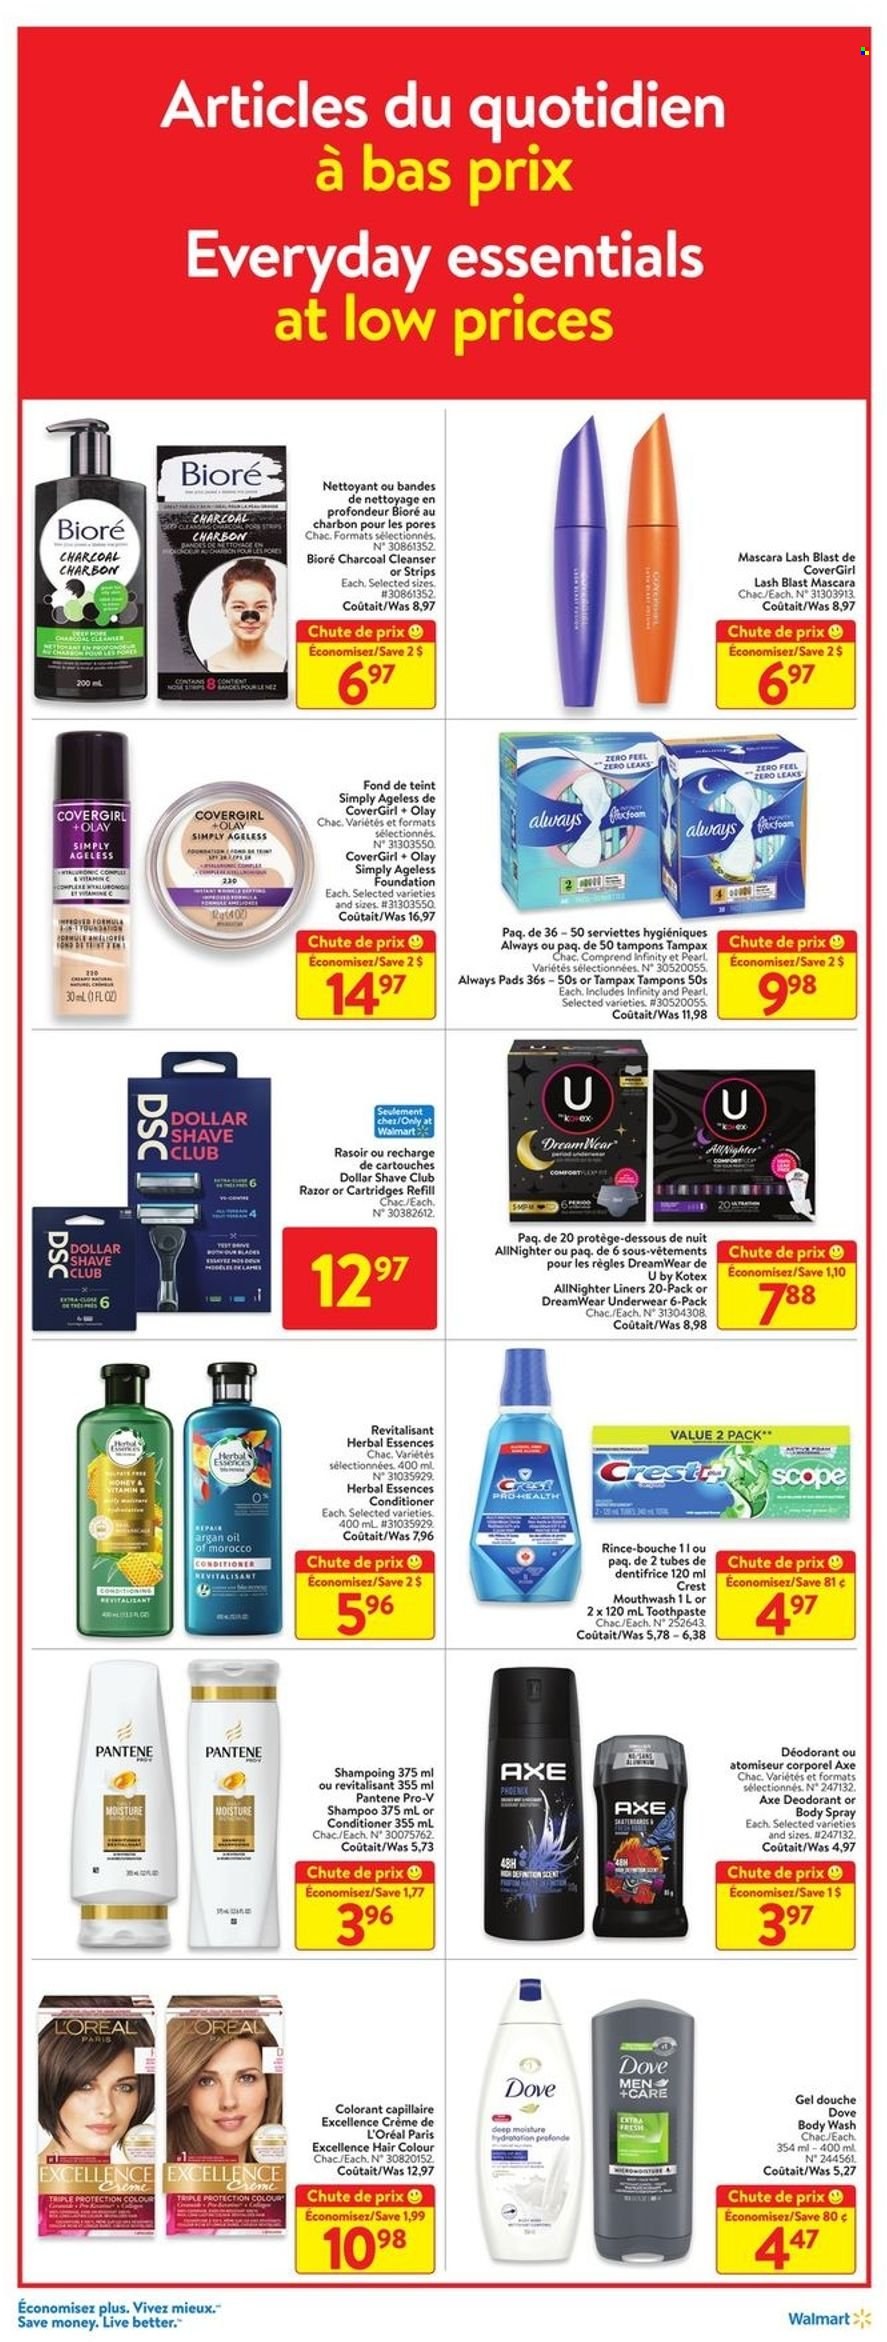 thumbnail - Walmart Flyer - December 30, 2021 - January 05, 2022 - Sales products - strips, body wash, toothpaste, mouthwash, Crest, Always pads, Kotex, tampons, cleanser, L’Oréal, Olay, Bioré®, Infinity, Dollar Shave Club, conditioner, hair color, Herbal Essences, body spray, anti-perspirant, razor, mascara, scope, argan oil, Dove, shampoo, Tampax, Pantene, deodorant. Page 8.